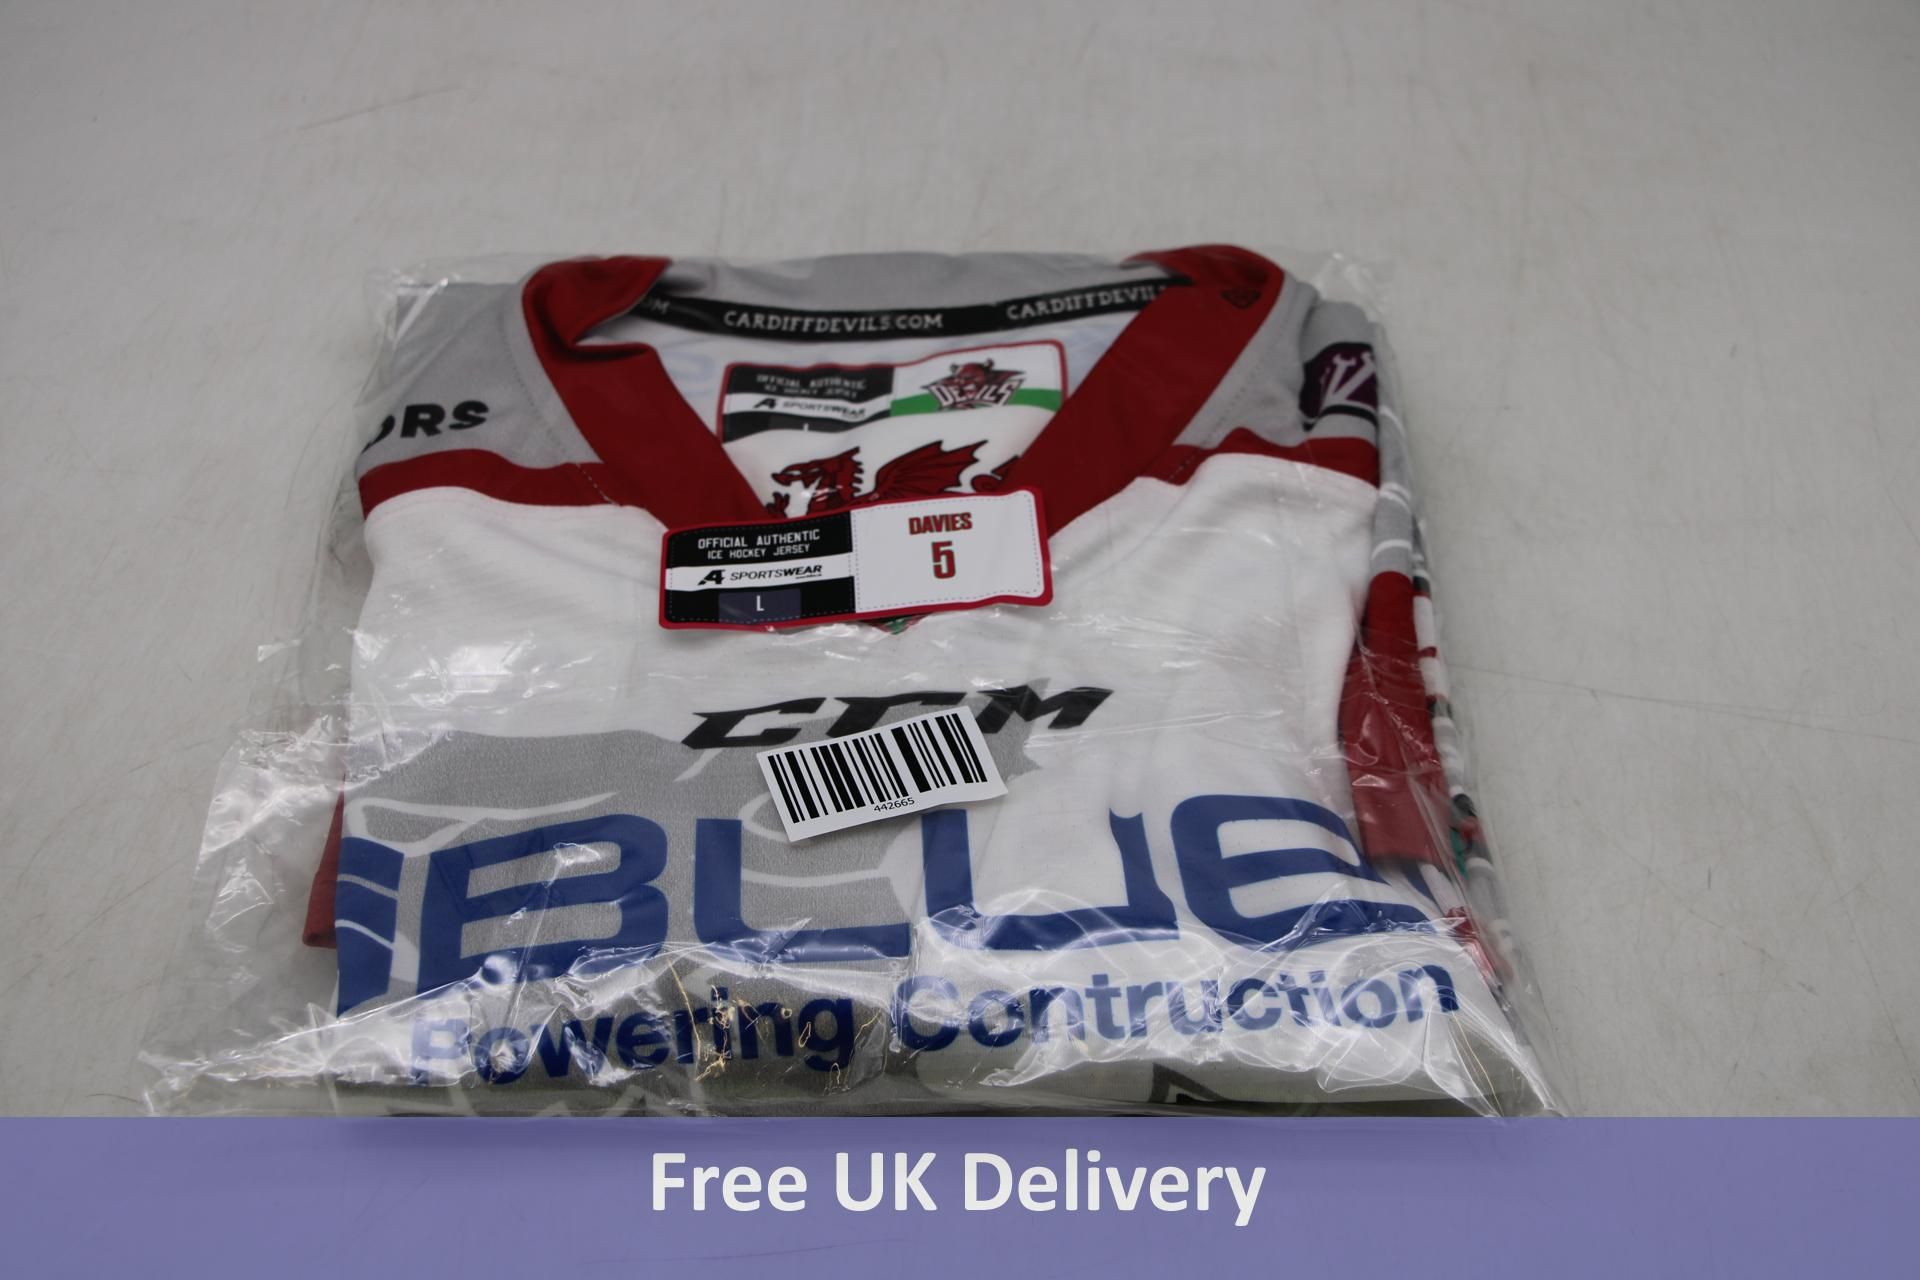 Cardiff Devils Ice Hockey Jersey, Davies Number 5, White, Size L